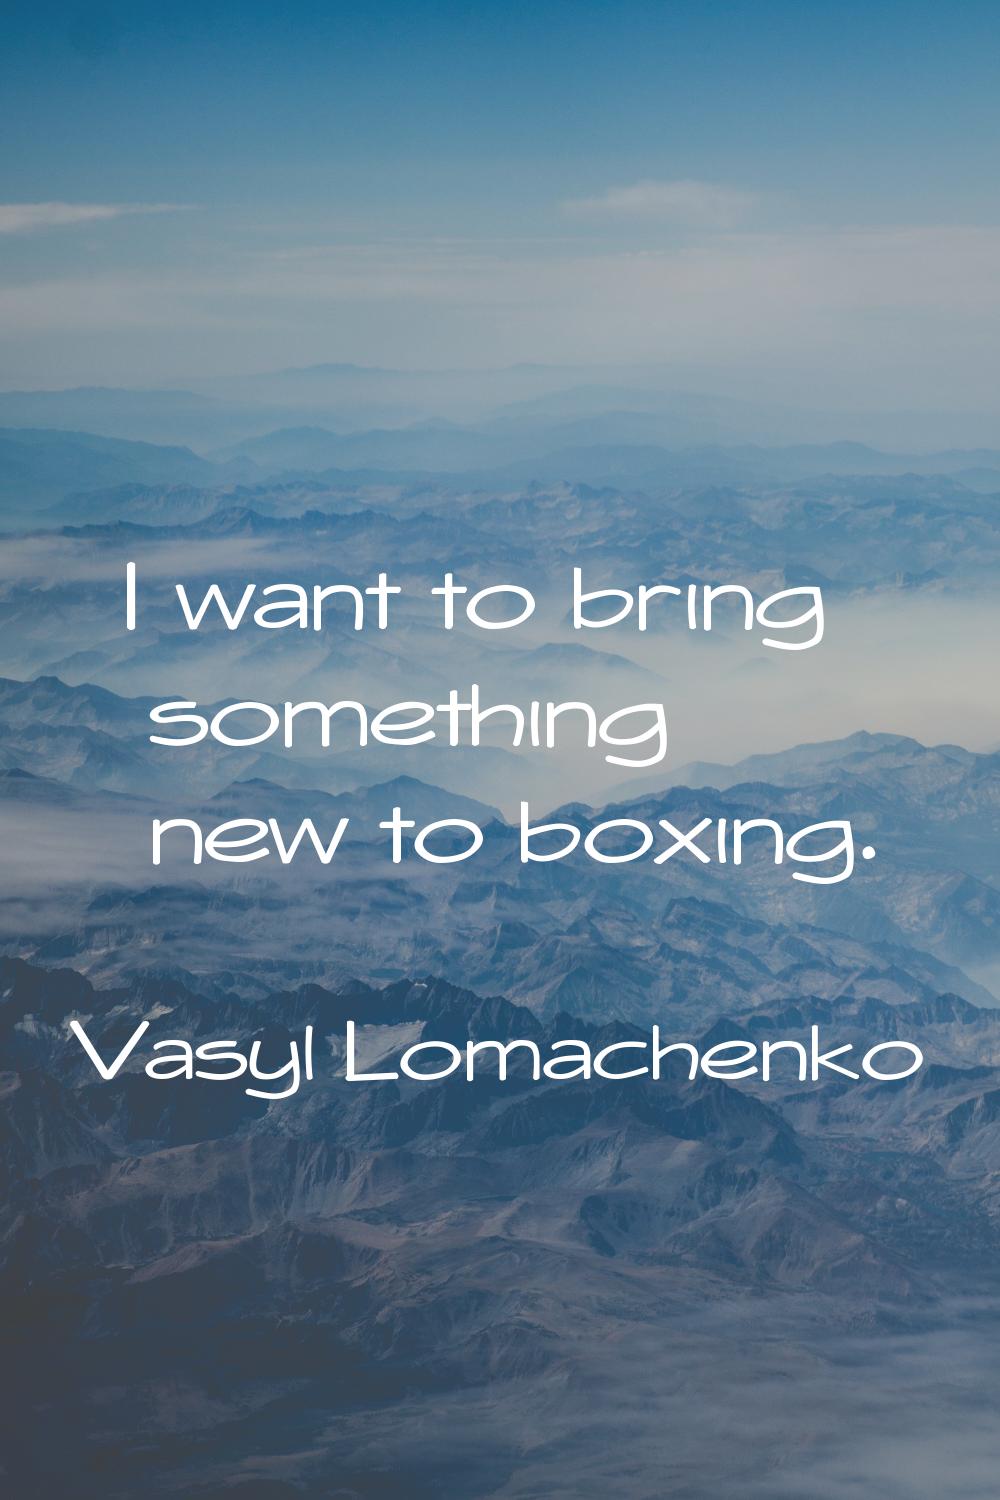 I want to bring something new to boxing.